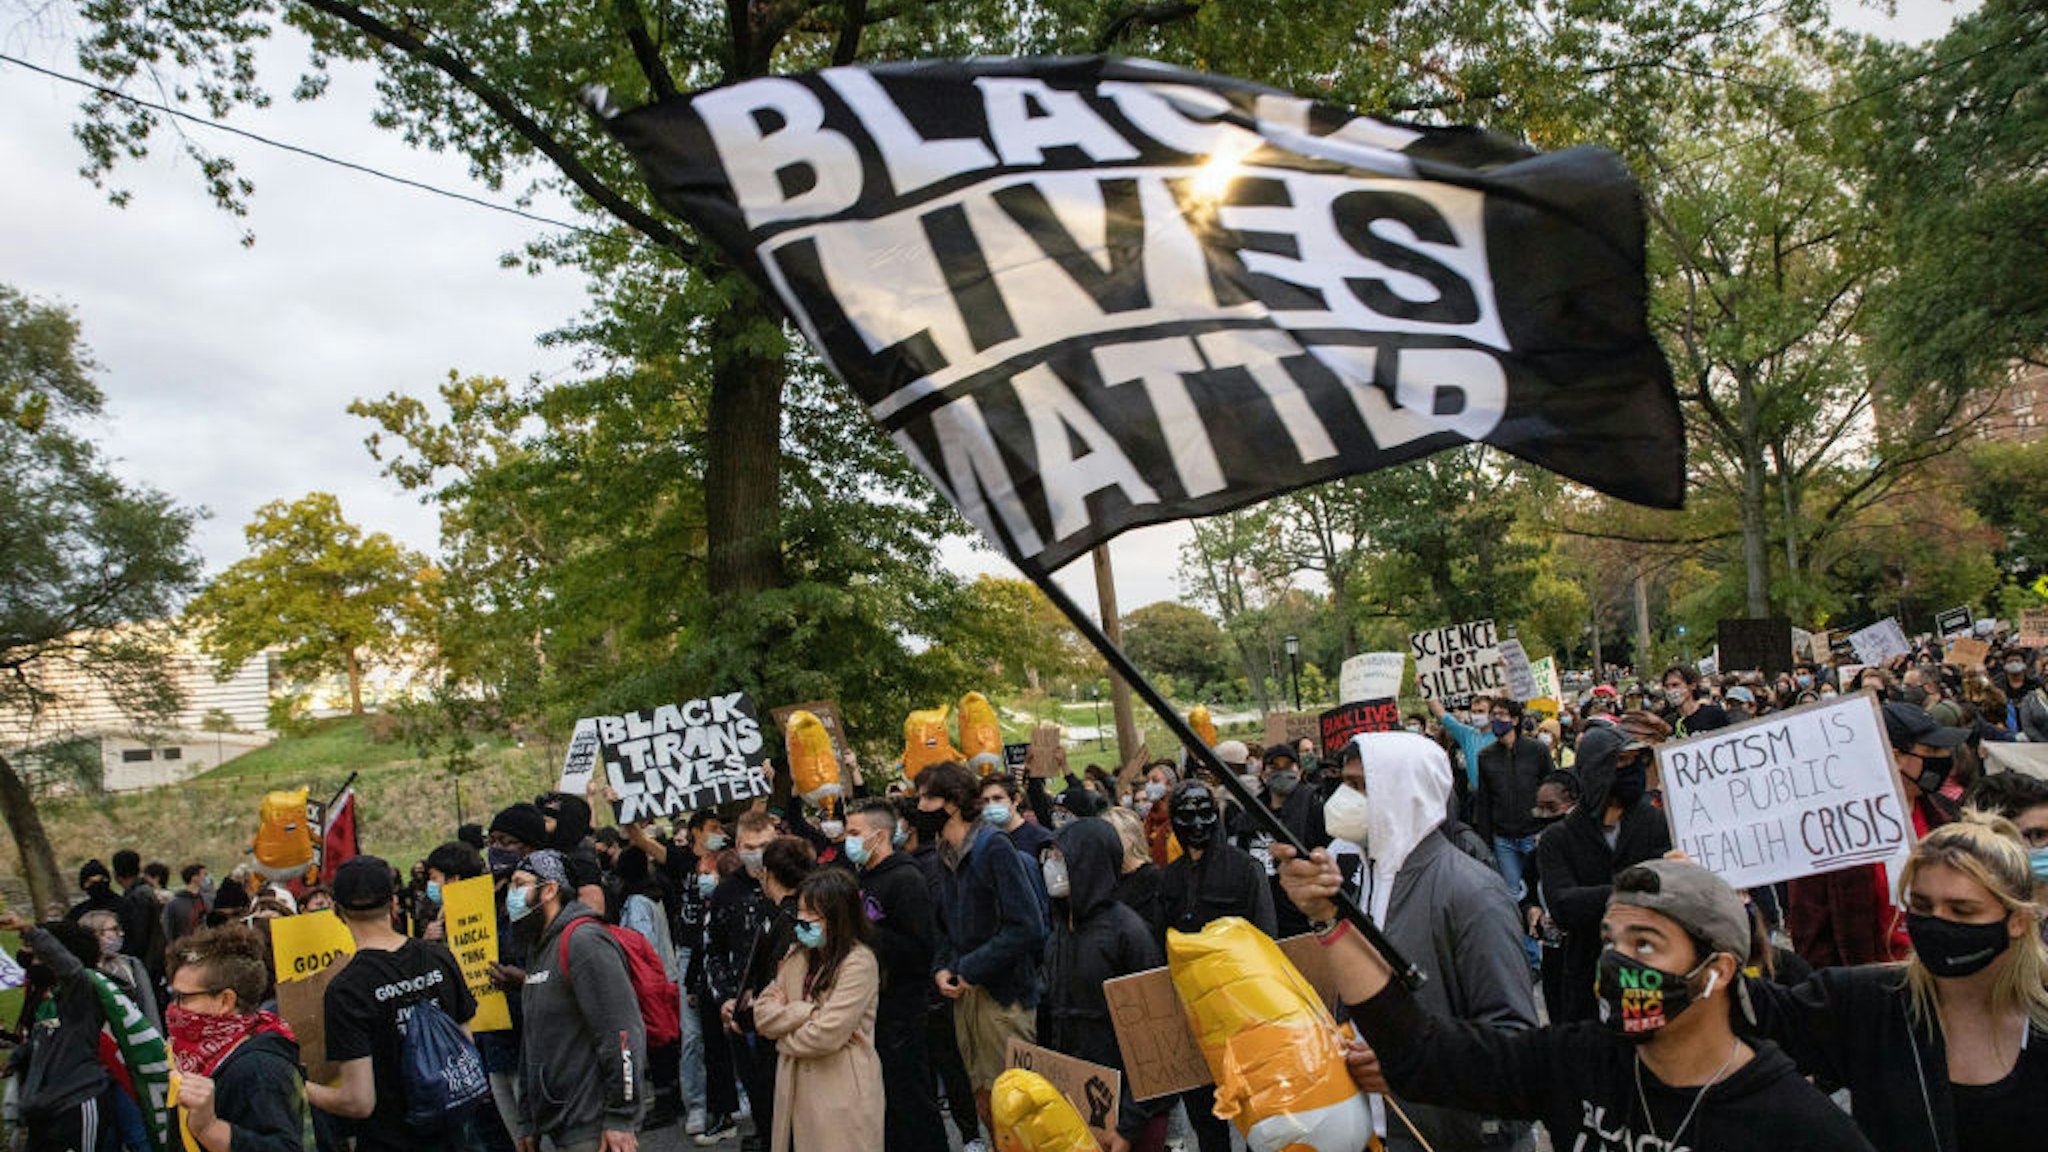 CLEVELAND, OHIO, UNITED STATES - 2020/09/29: Protesters wearing masks march through University Circle while holding up placards and banners during the protest.